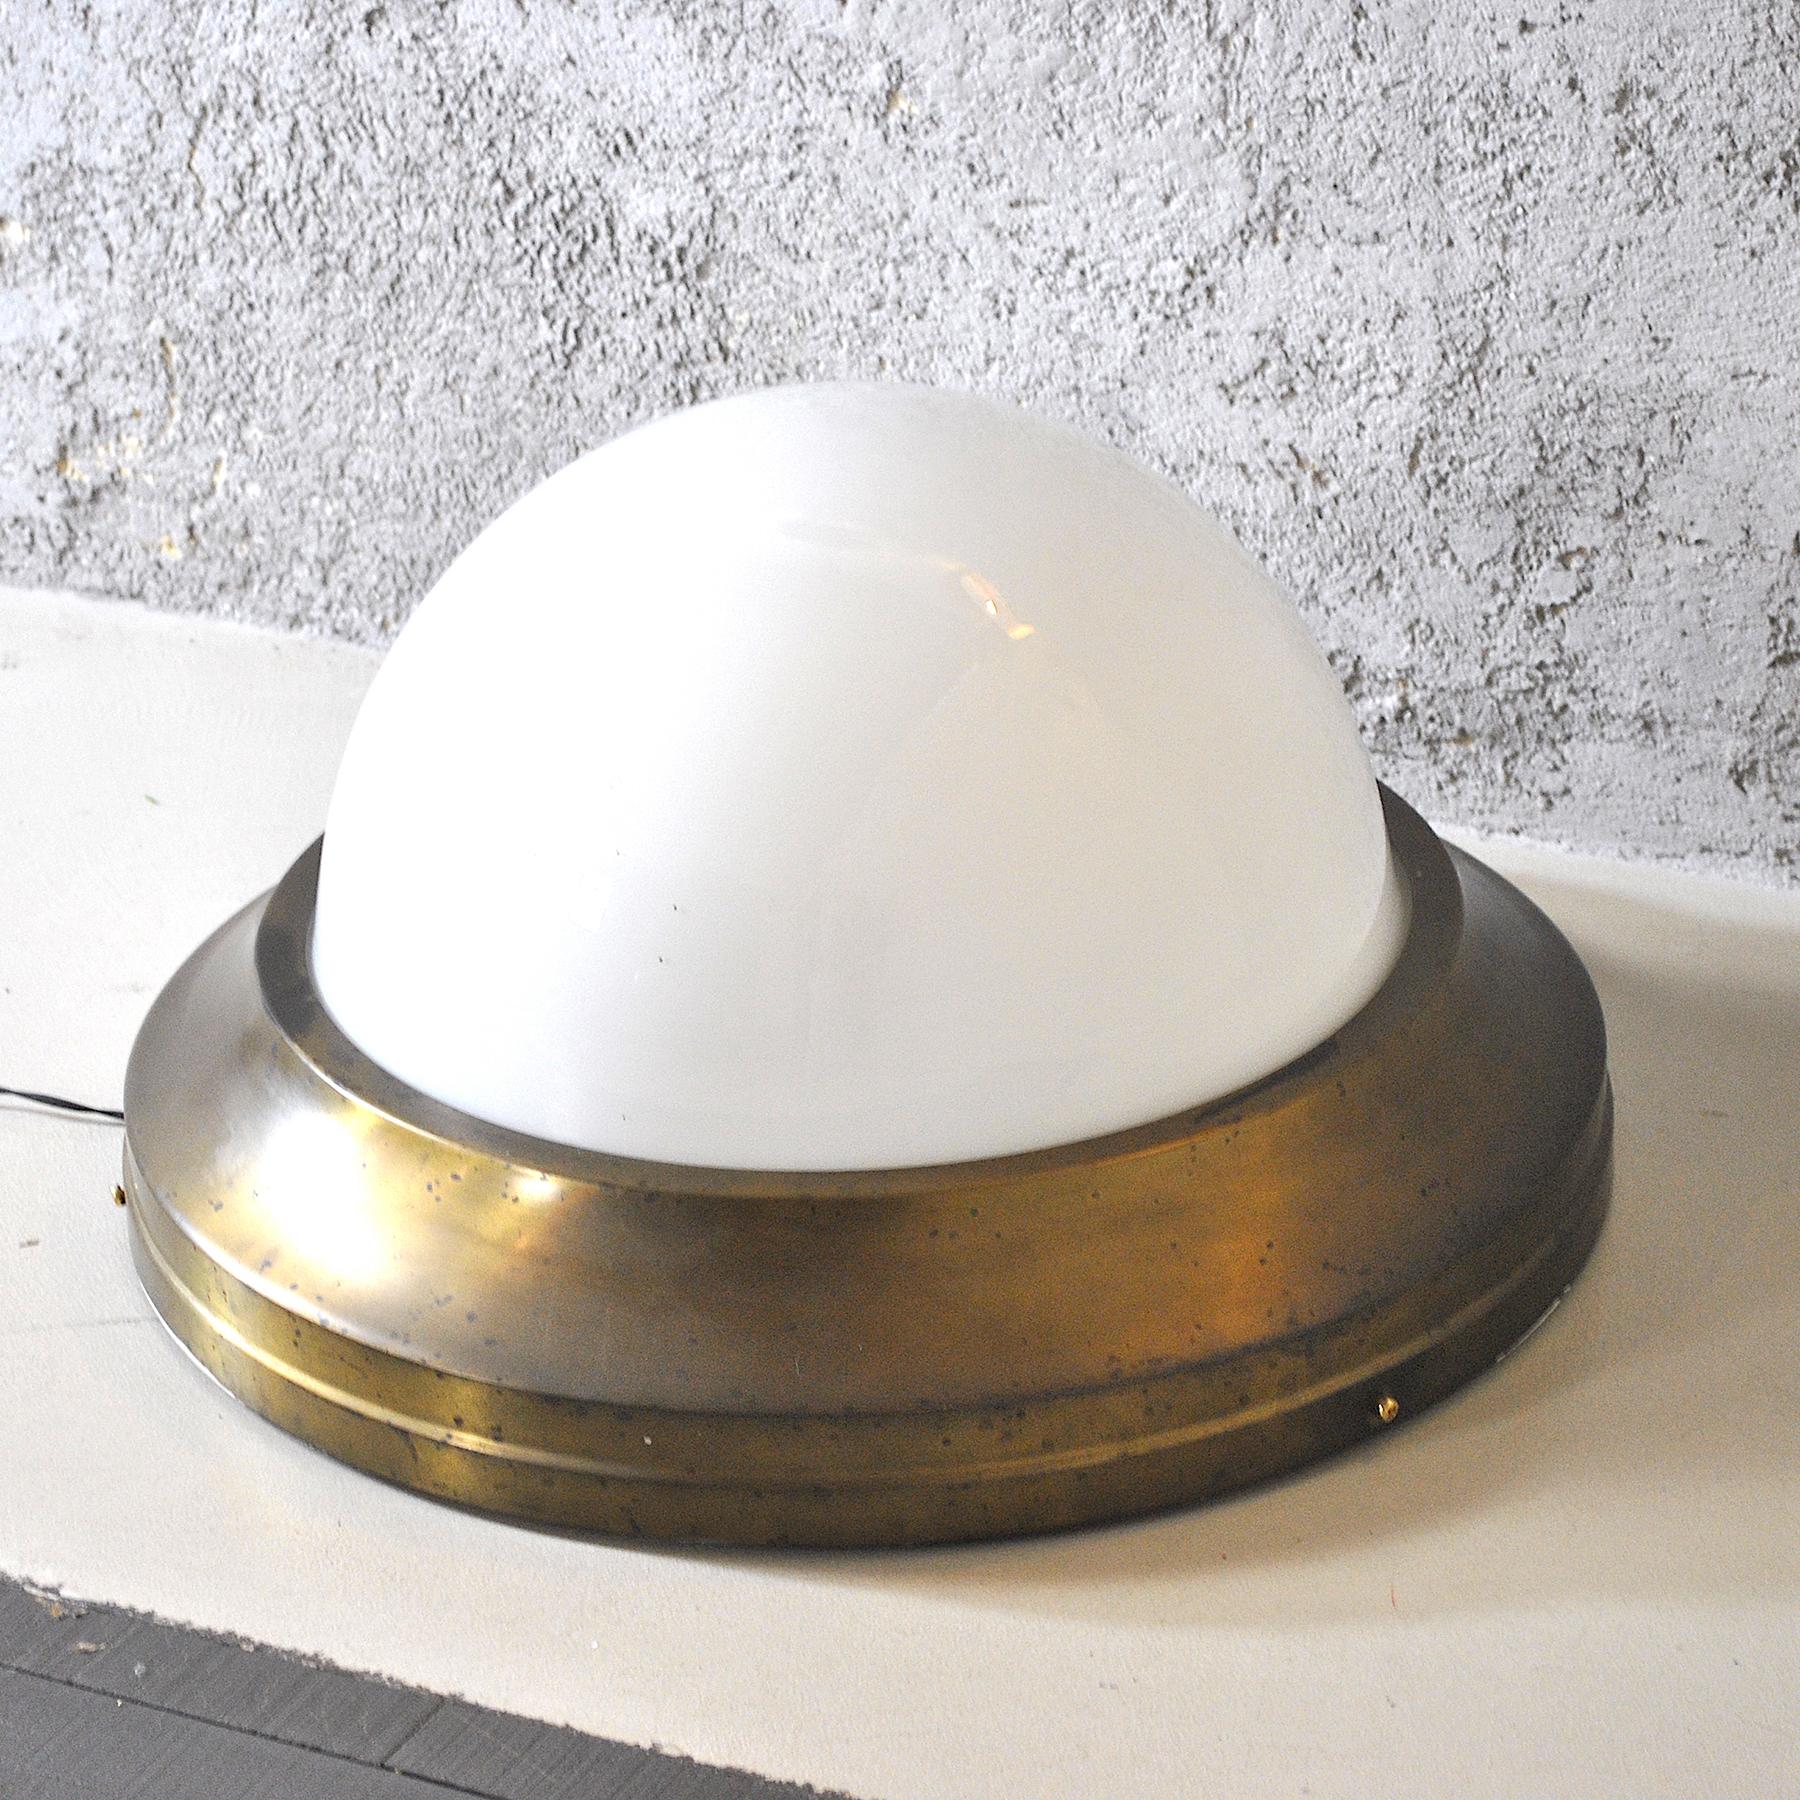 A circular wall light in brass and opaline Pier Luigi Caccia Dominioni.
Luigi Caccia Dominioni was born in Milan on 7 December 1913, in the family home in Piazza Sant'Ambrogio, a house he rebuilt after it was destroyed in the bombing of August 1943.